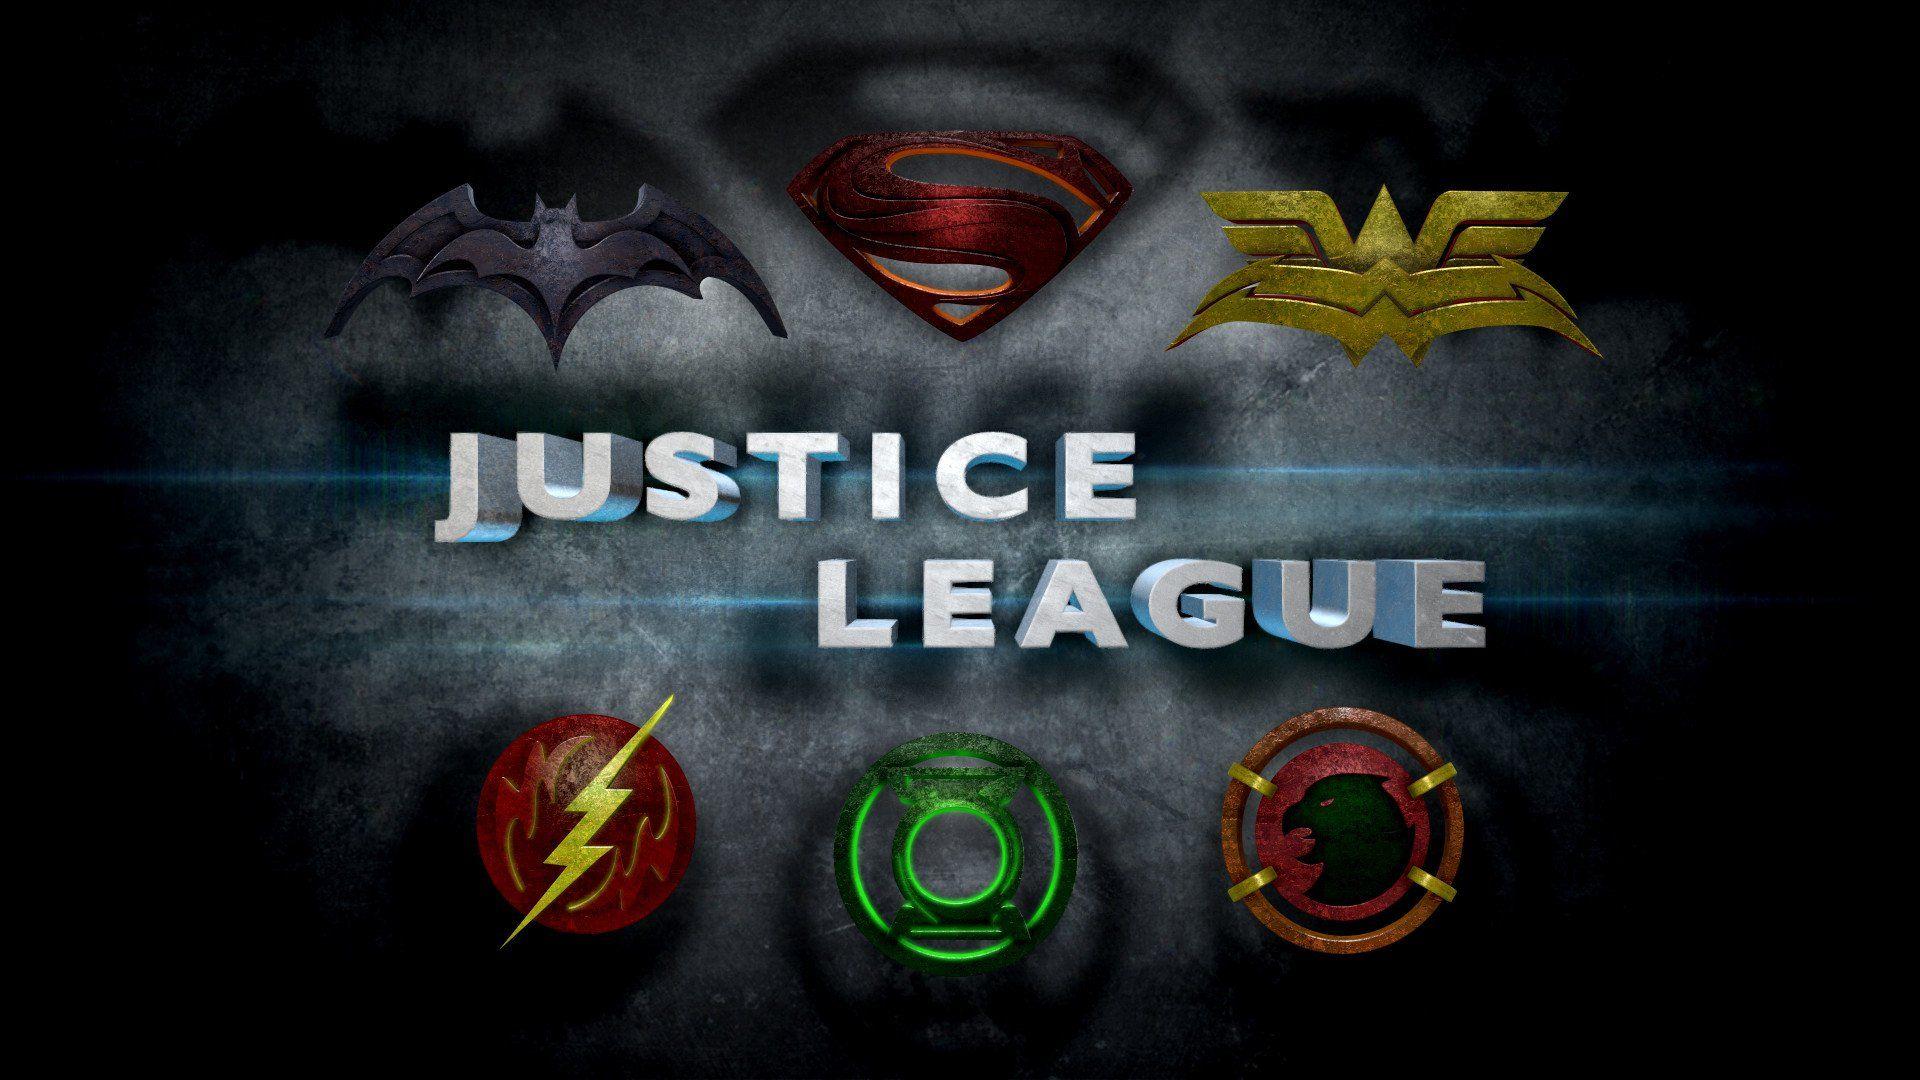 Justice League Logo - Justice League Movie Logos In the Style of Man of Steel